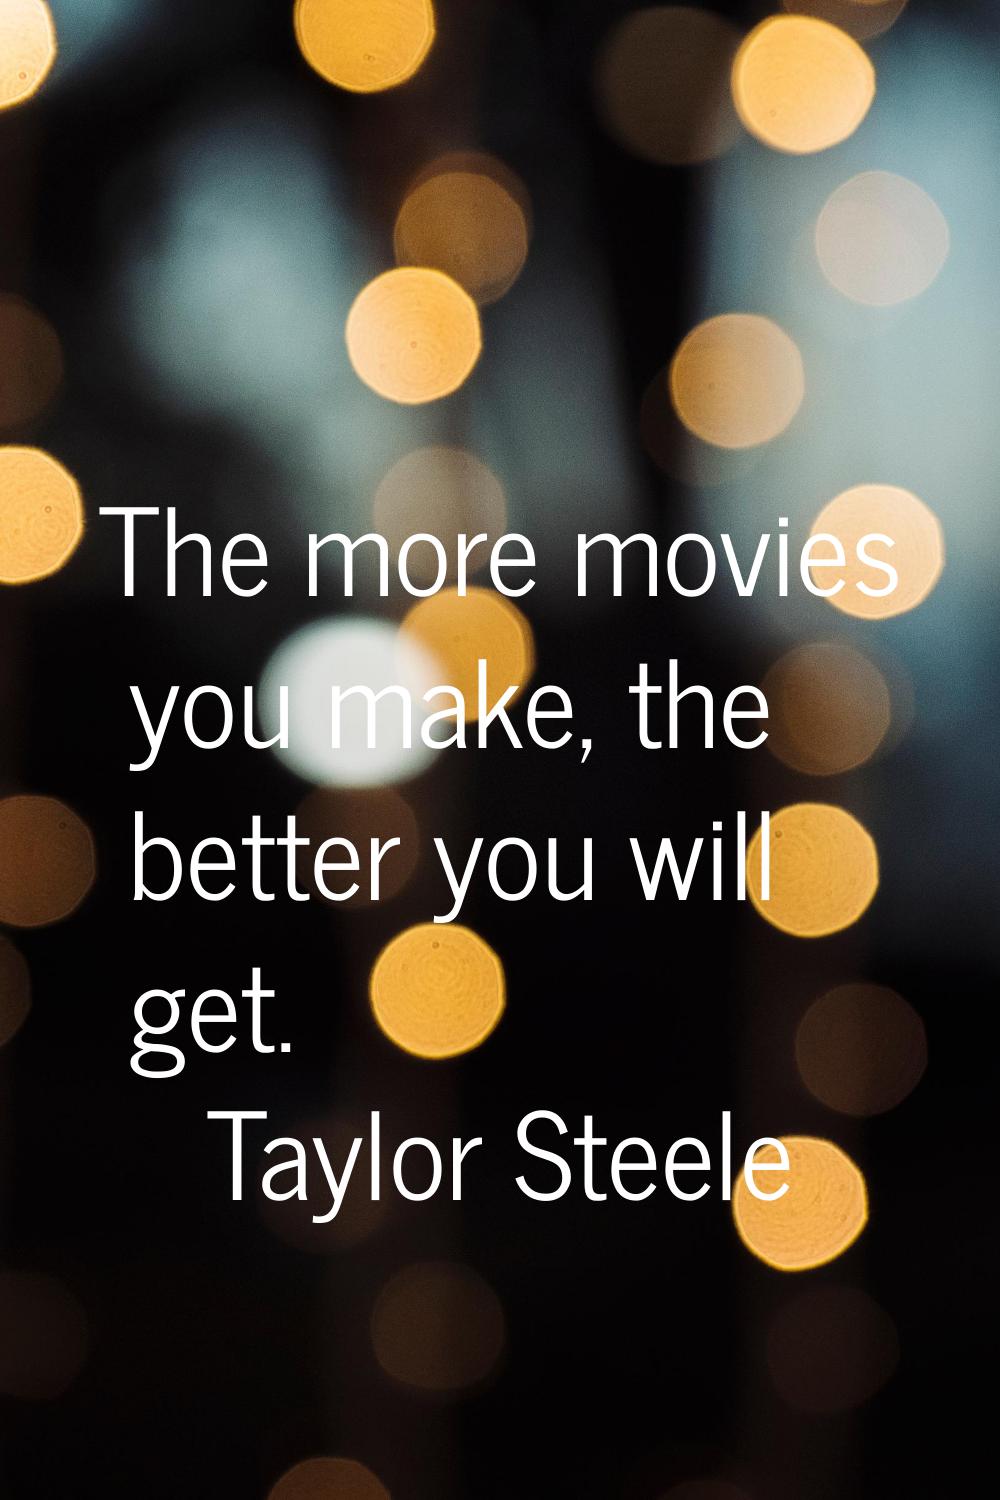 The more movies you make, the better you will get.